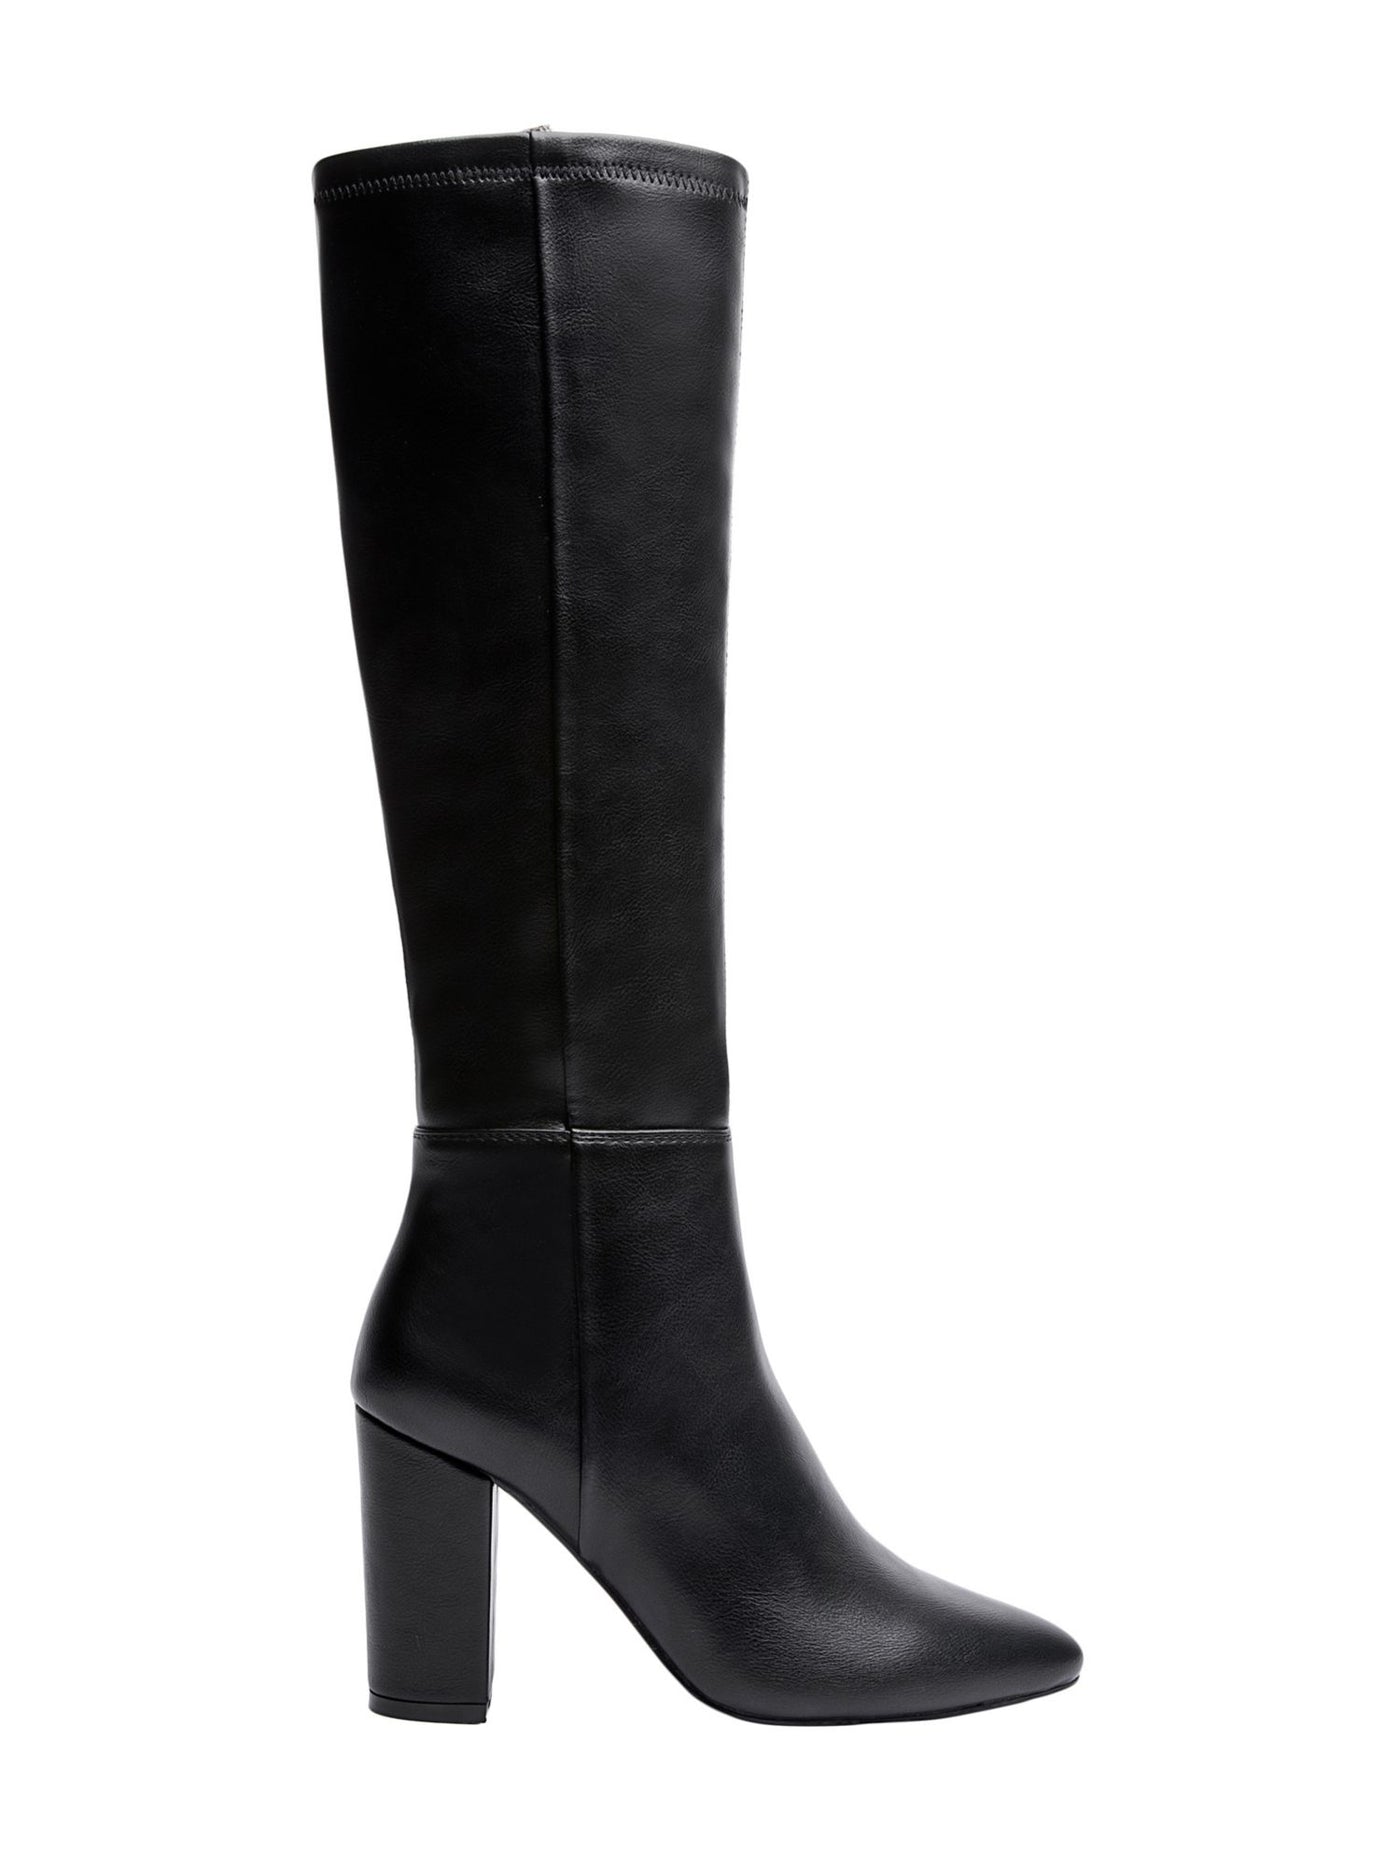 JANE AND THE SHOE Womens Black Mabel Pointy Toe Block Heel Zip-Up Dress Boots 8 M